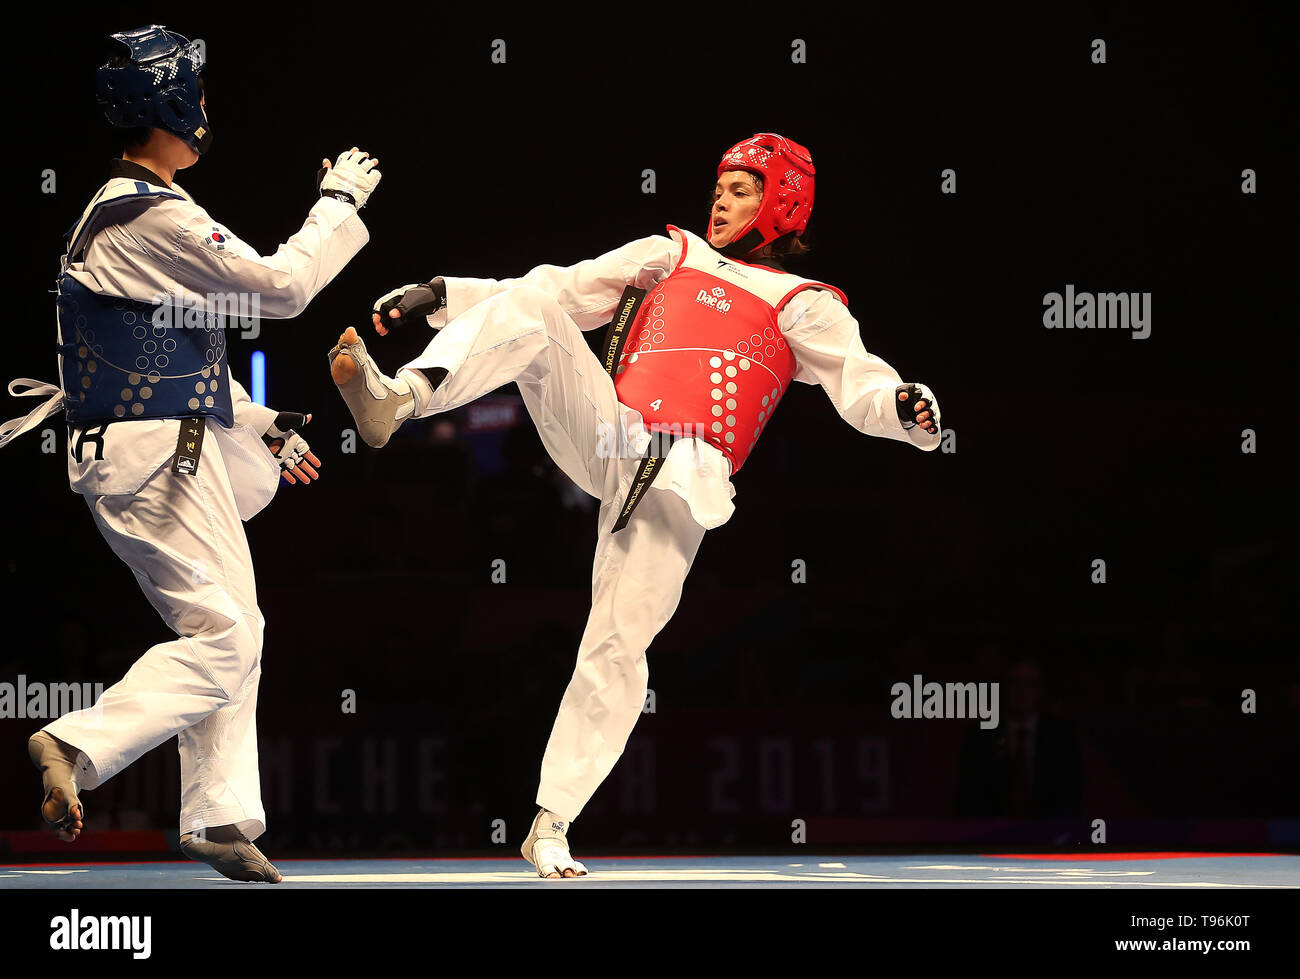 Mexico's Maria Espinoza (right) on her way to taking silver in the Women's -73 final against Korea's Da-bin Lee, during day two of the World Taekwondo Championships at Manchester Arena. Stock Photo